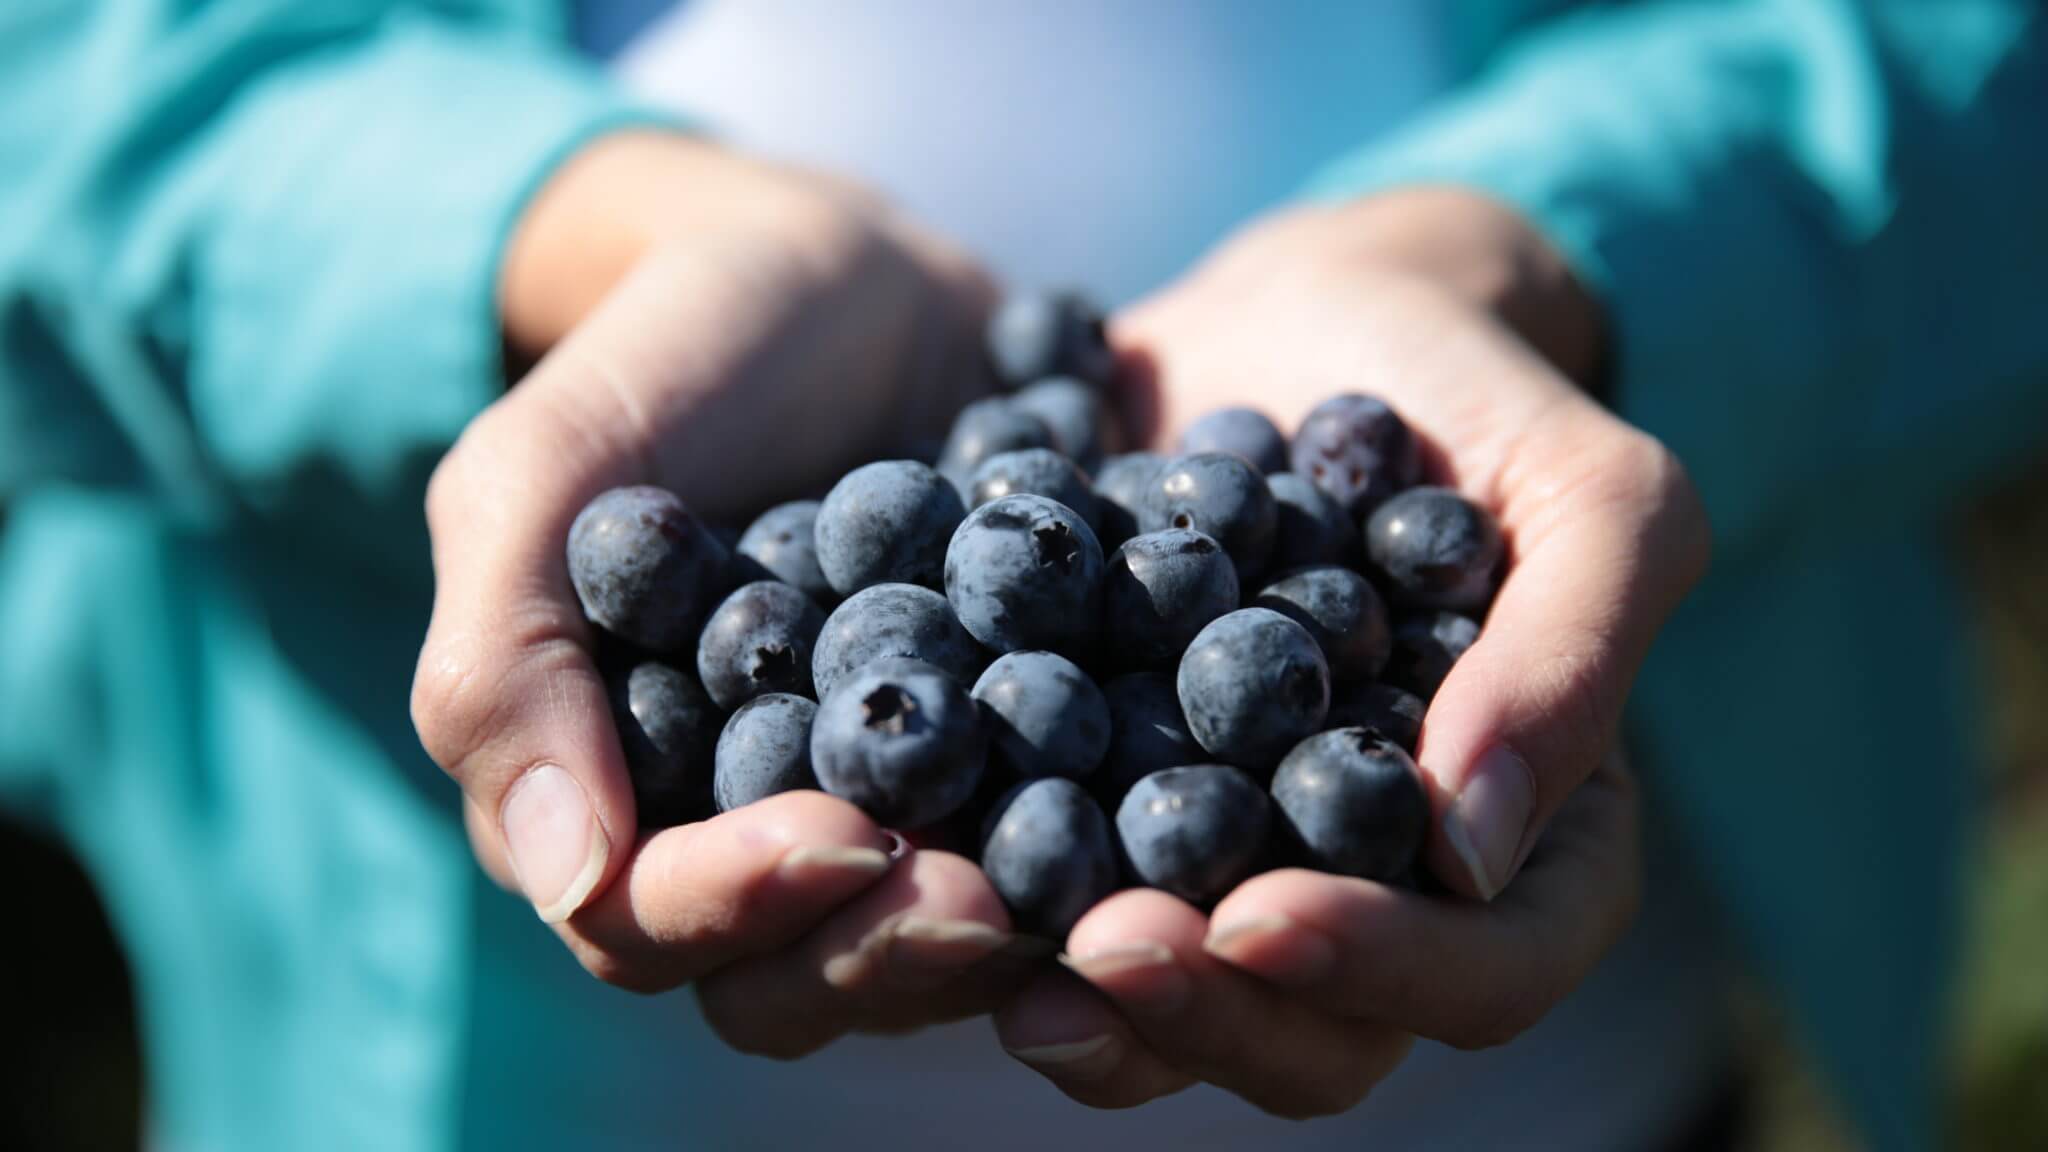 Try our blueberries at the festival! 